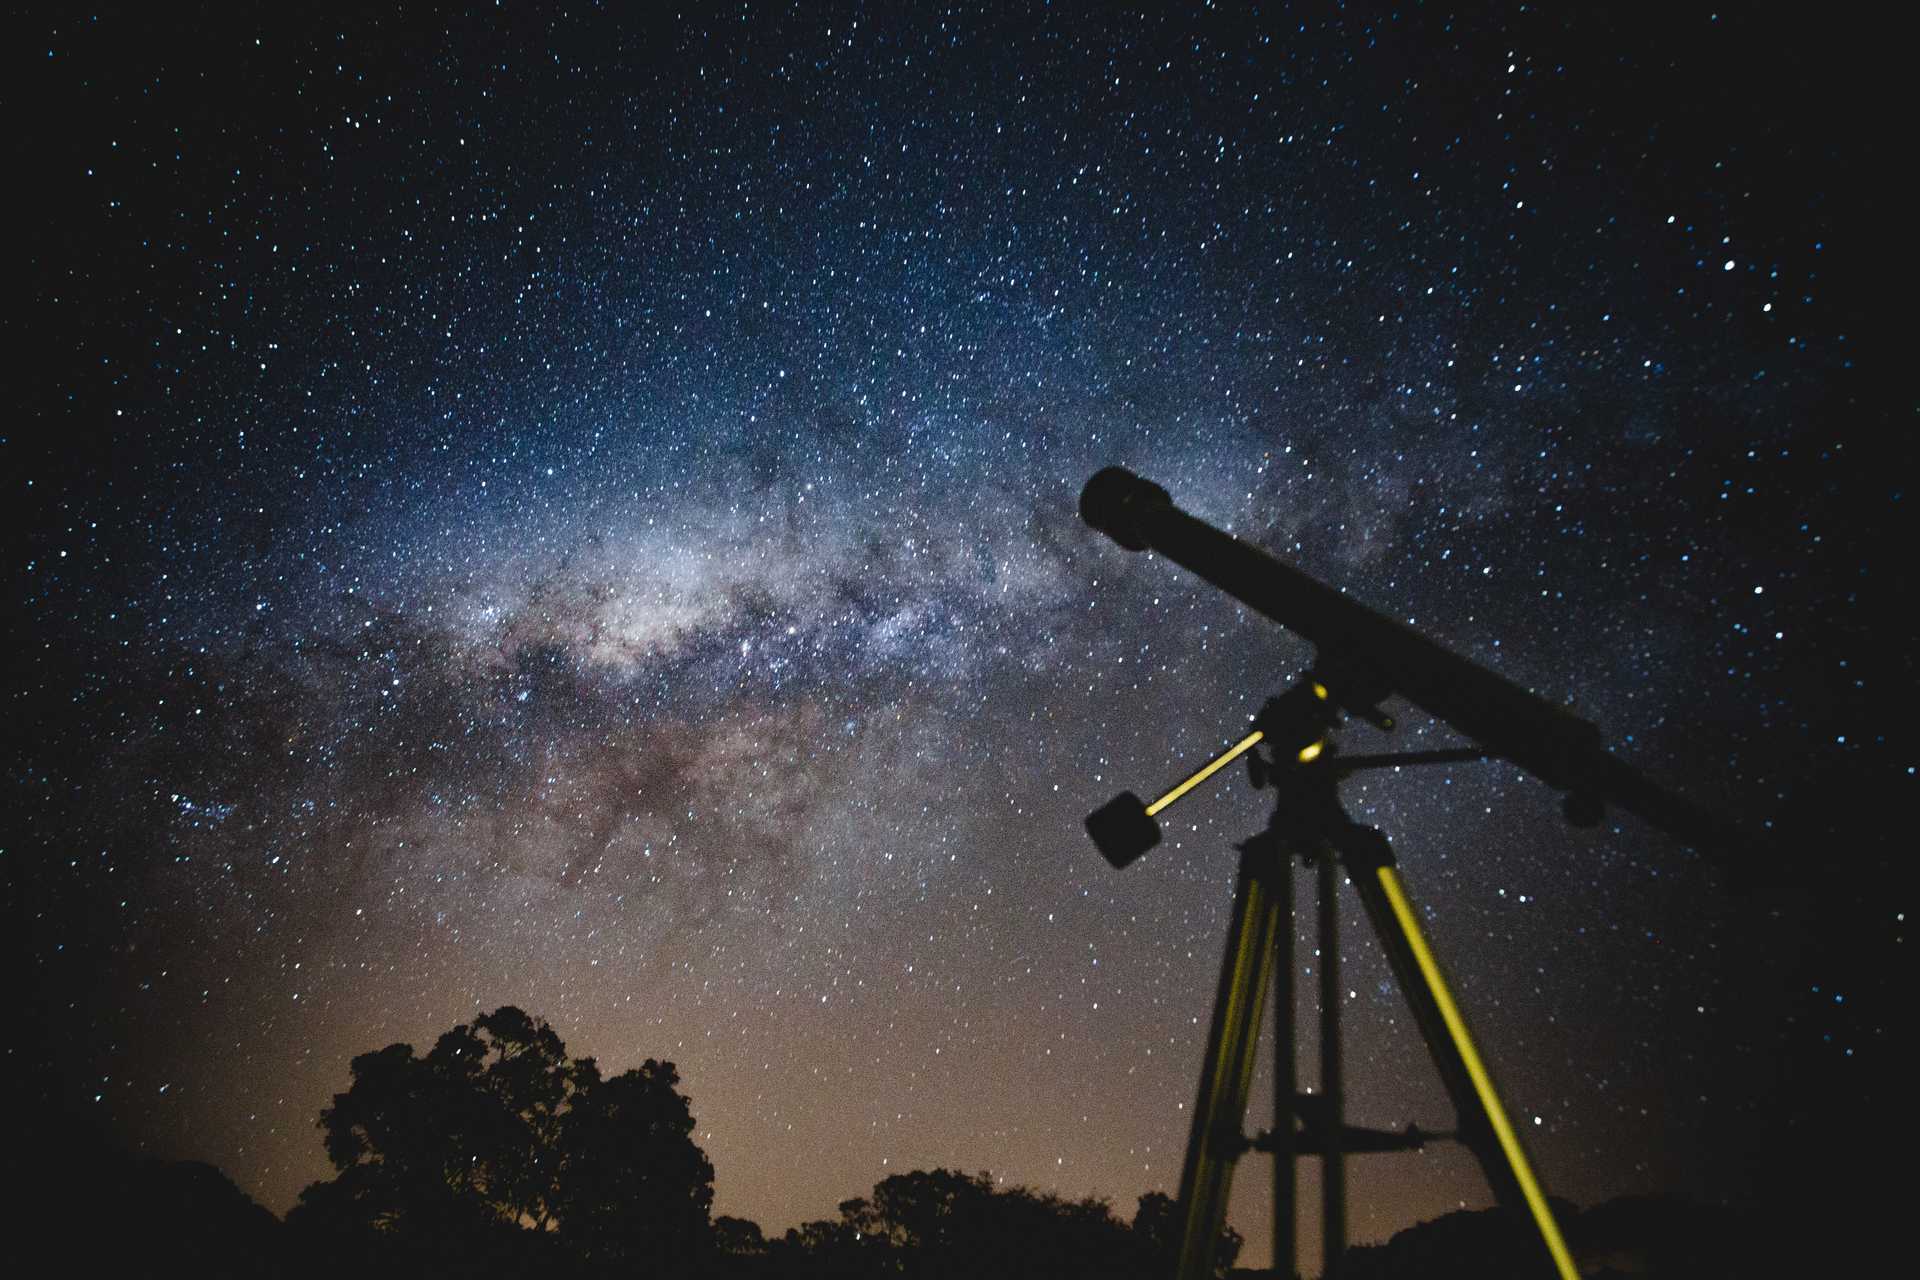 Telescope in the foreground, space in the background